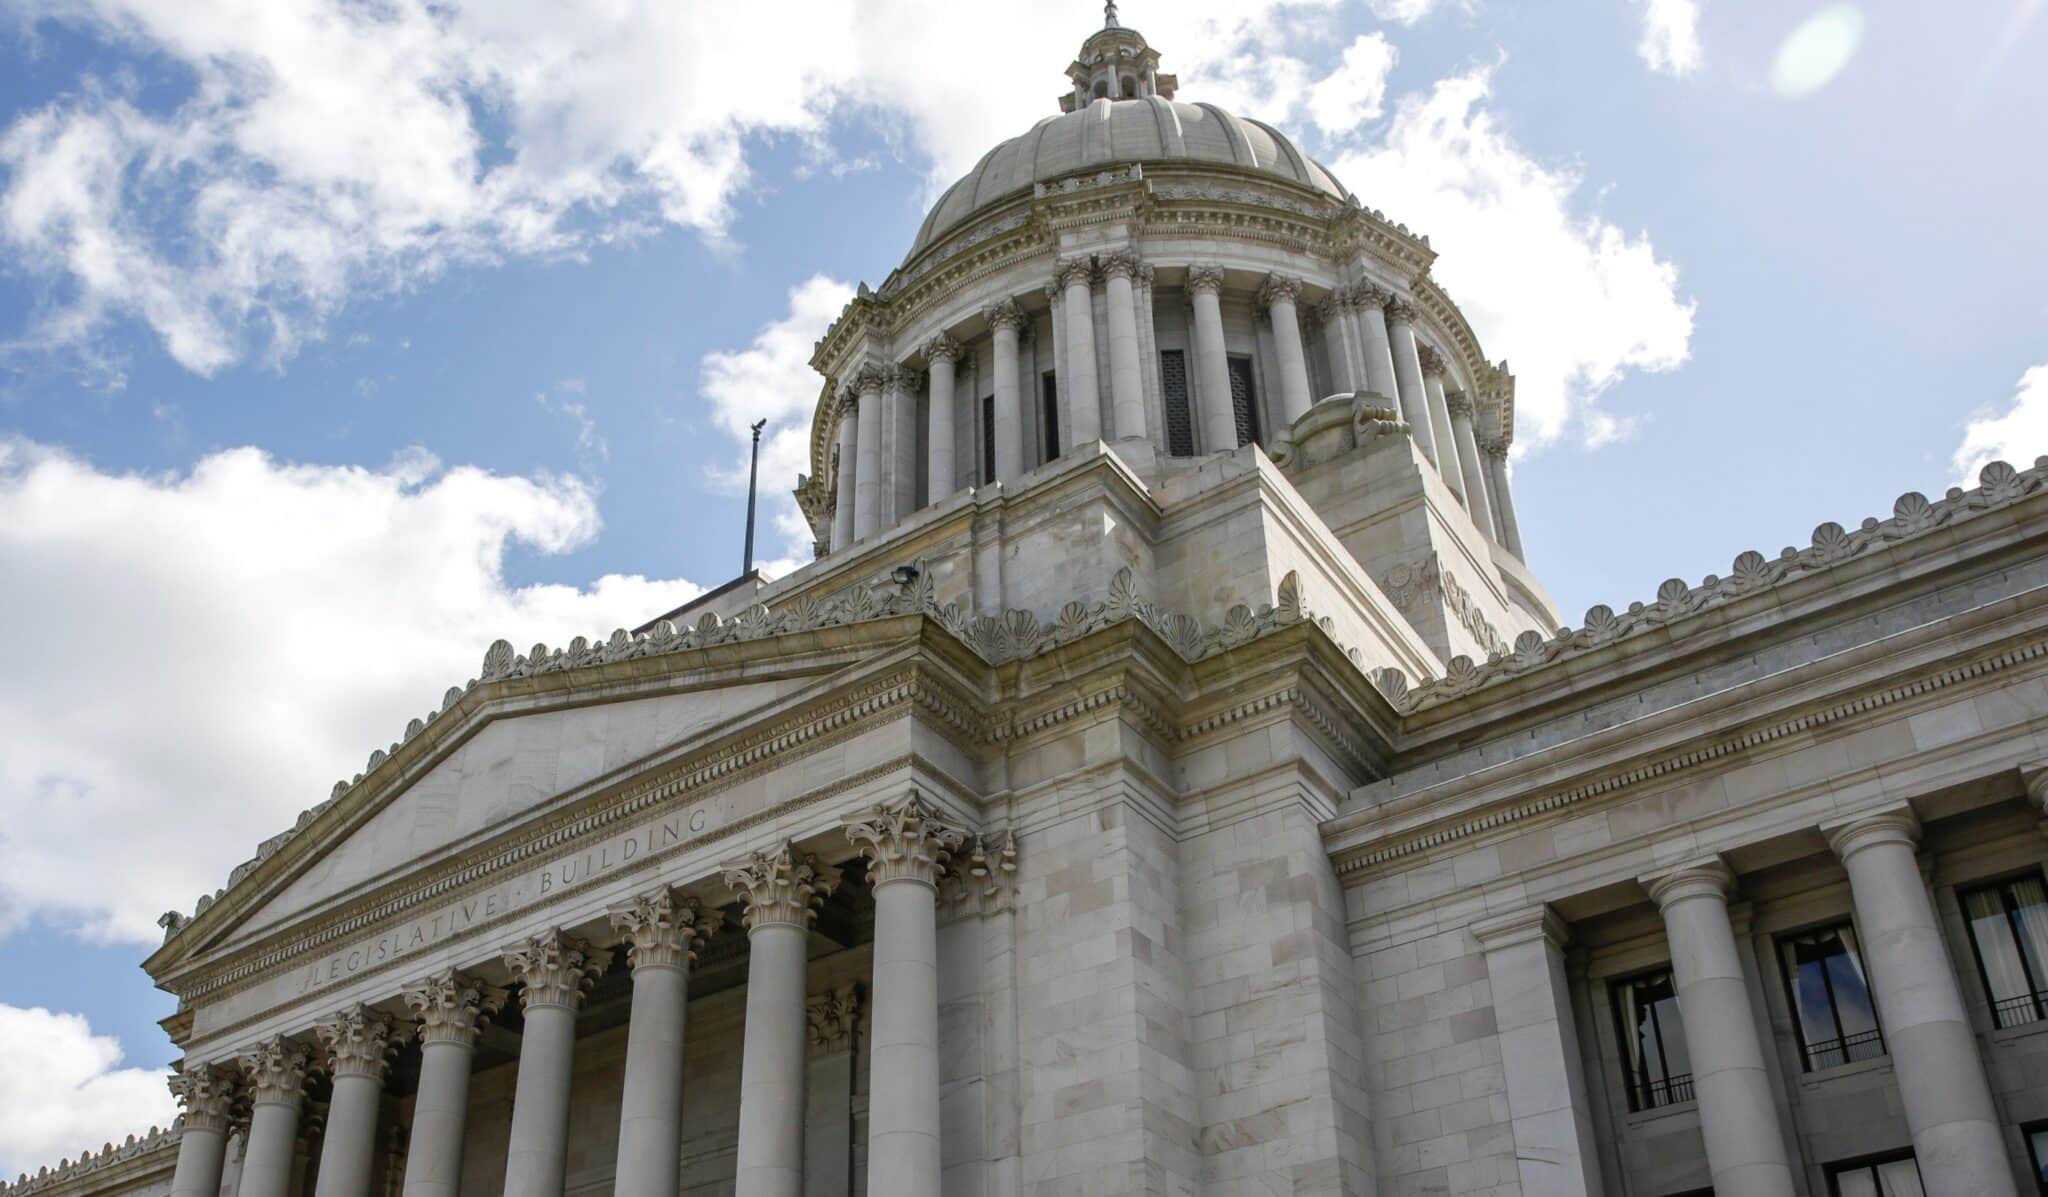 The Washington state Capitol is pictured in Olympia April 11, 2020. (OSV News photo/Jason Redmond, Reuters)